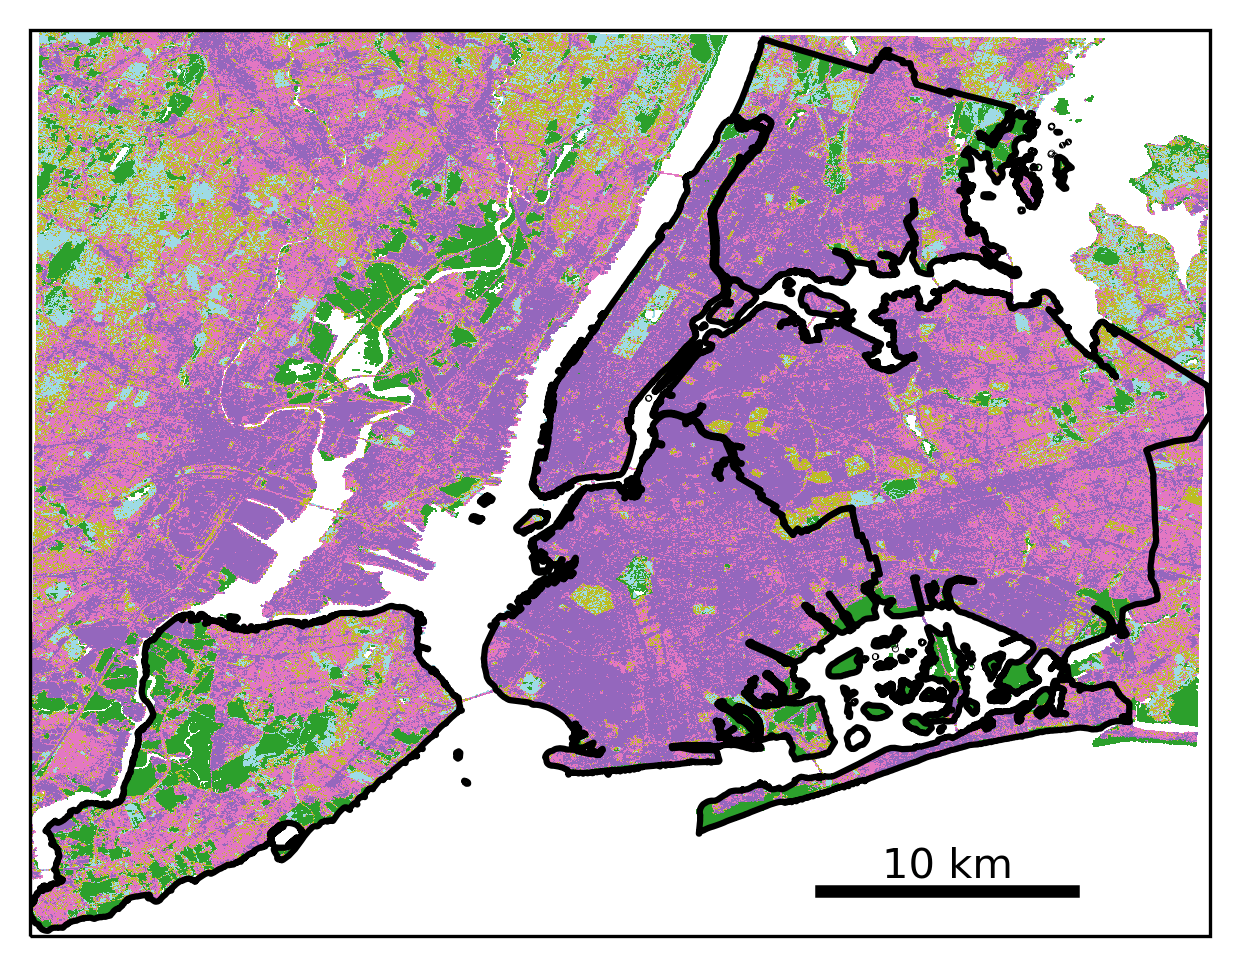 A map of New York City showing where vegetation absorbs carbon